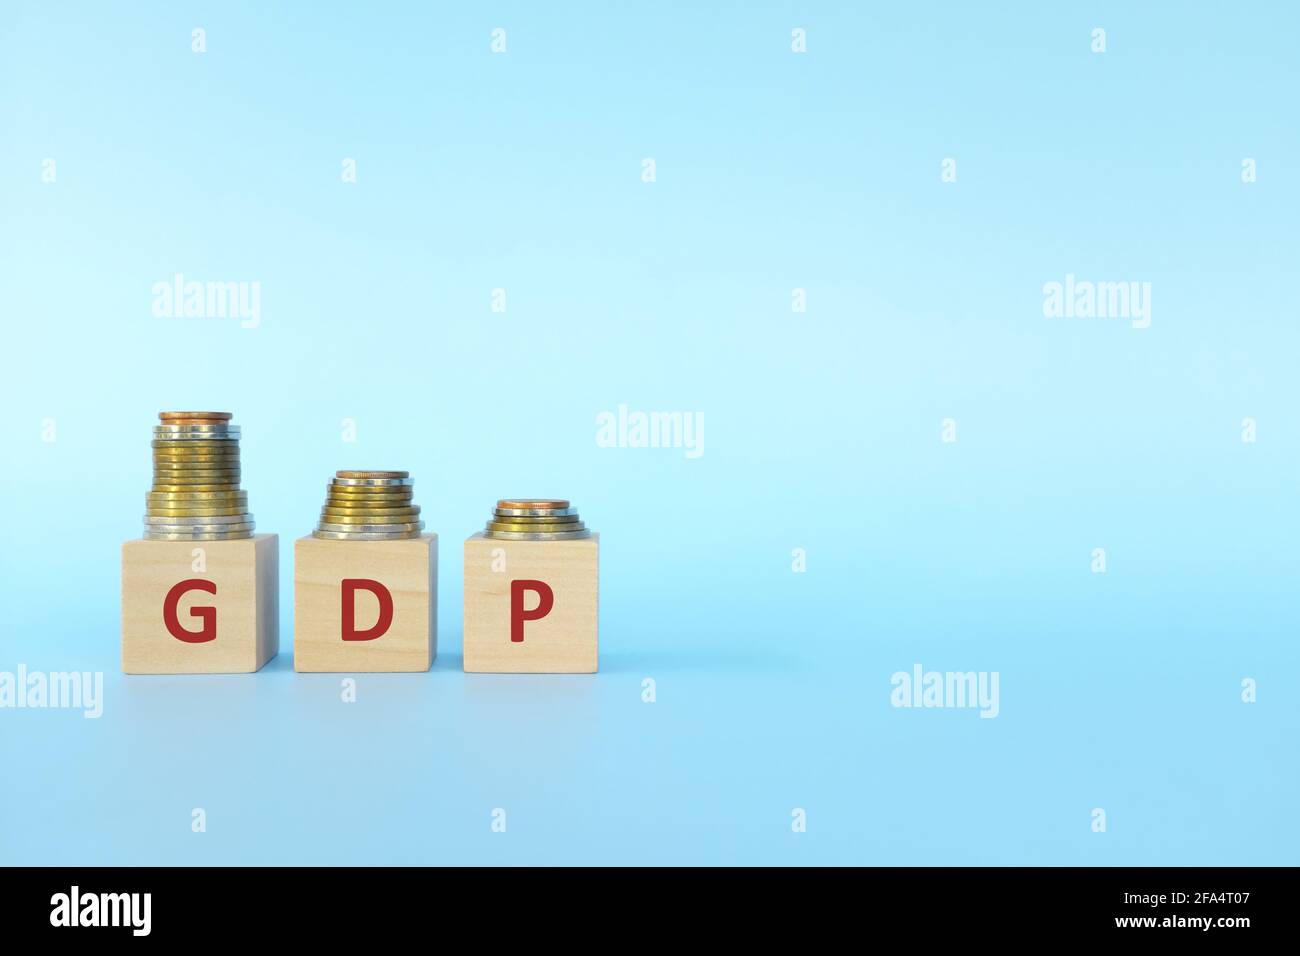 GDP or gross domestic product letters in wooden blocks with decreasing stack of coins. Economic crisis, decline and recession concept. Stock Photo